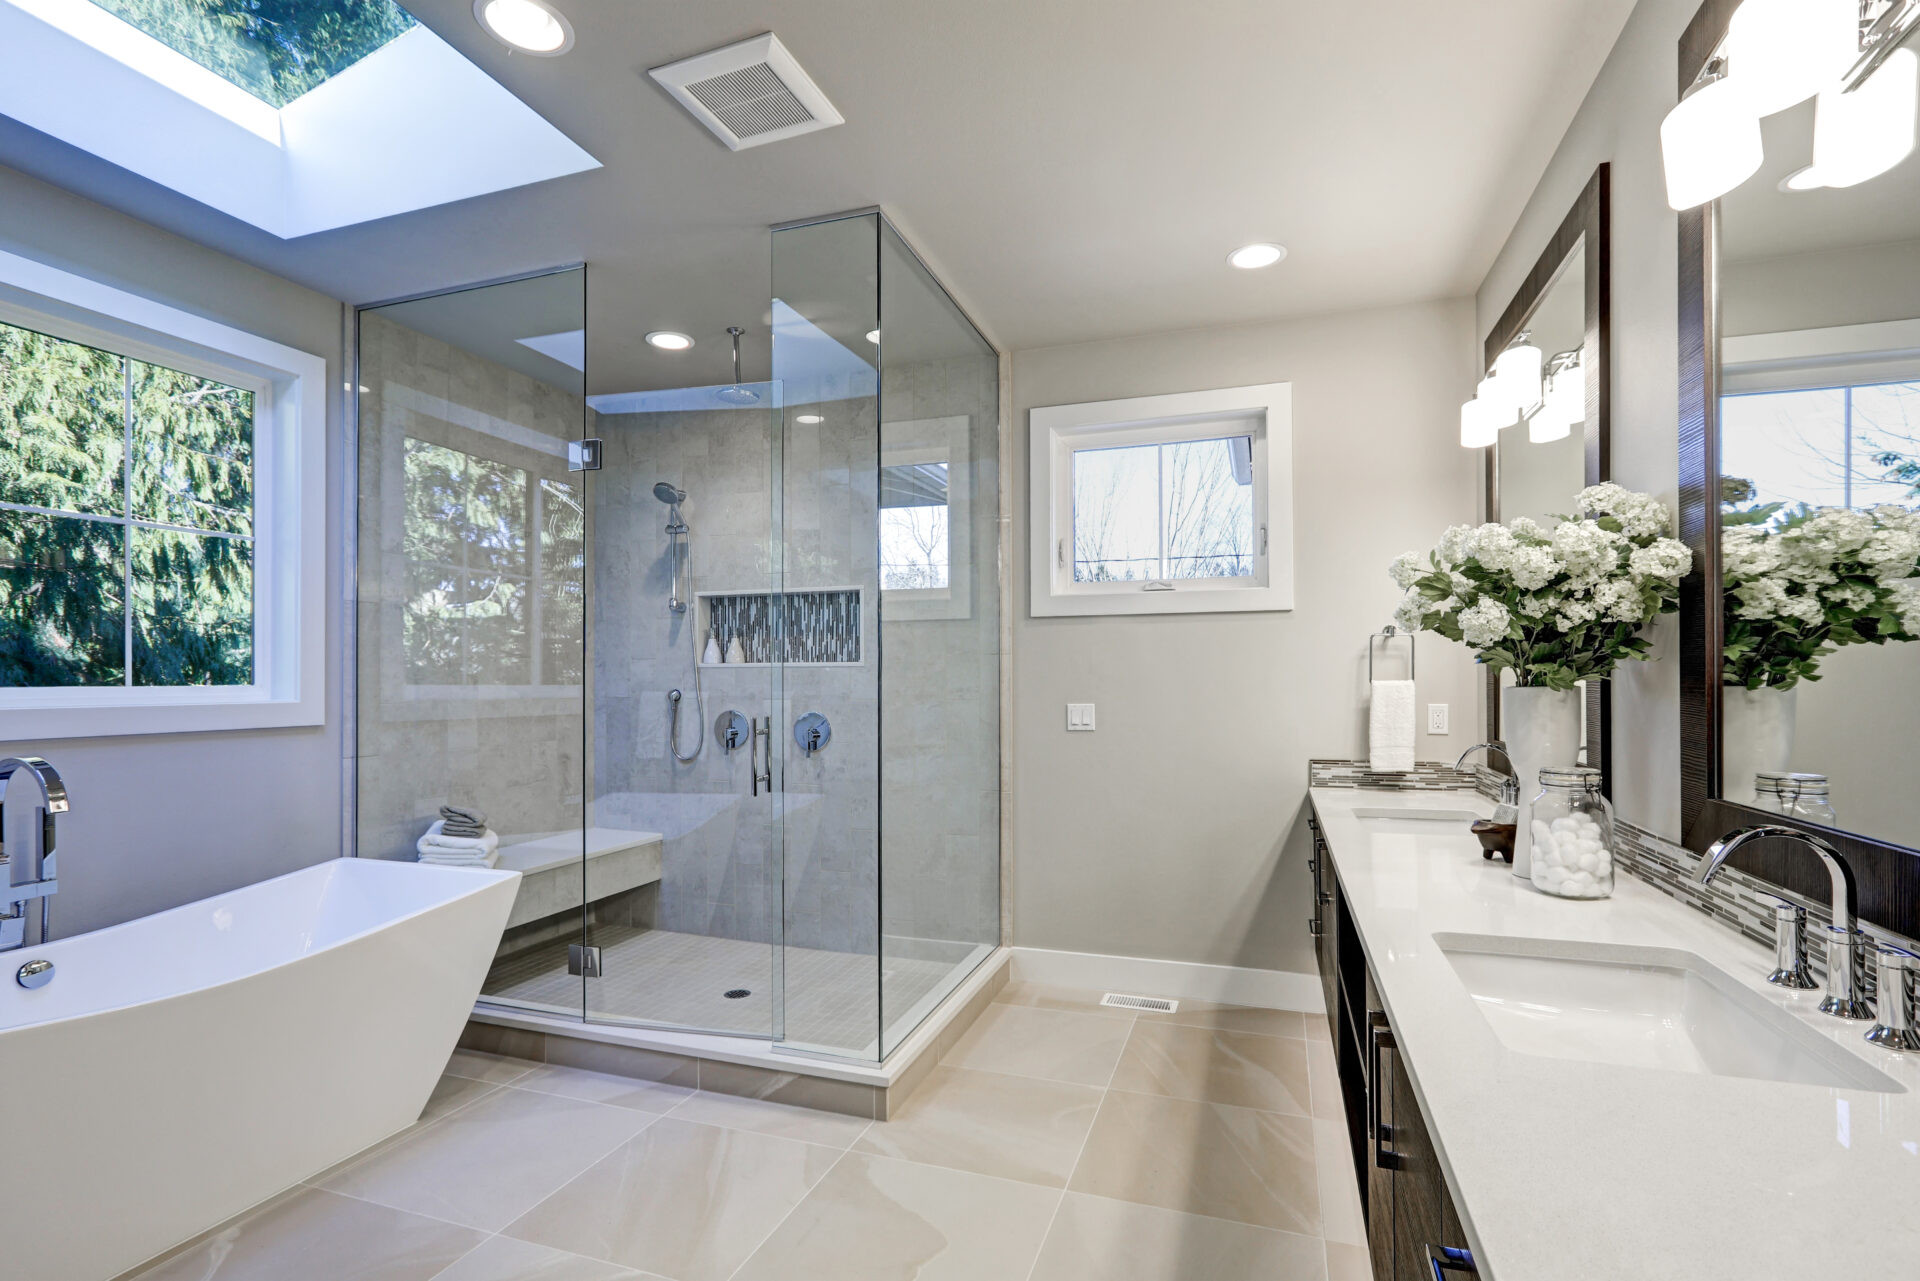 Recently remodeled Chicago bathroom by 4Ever Remodeling